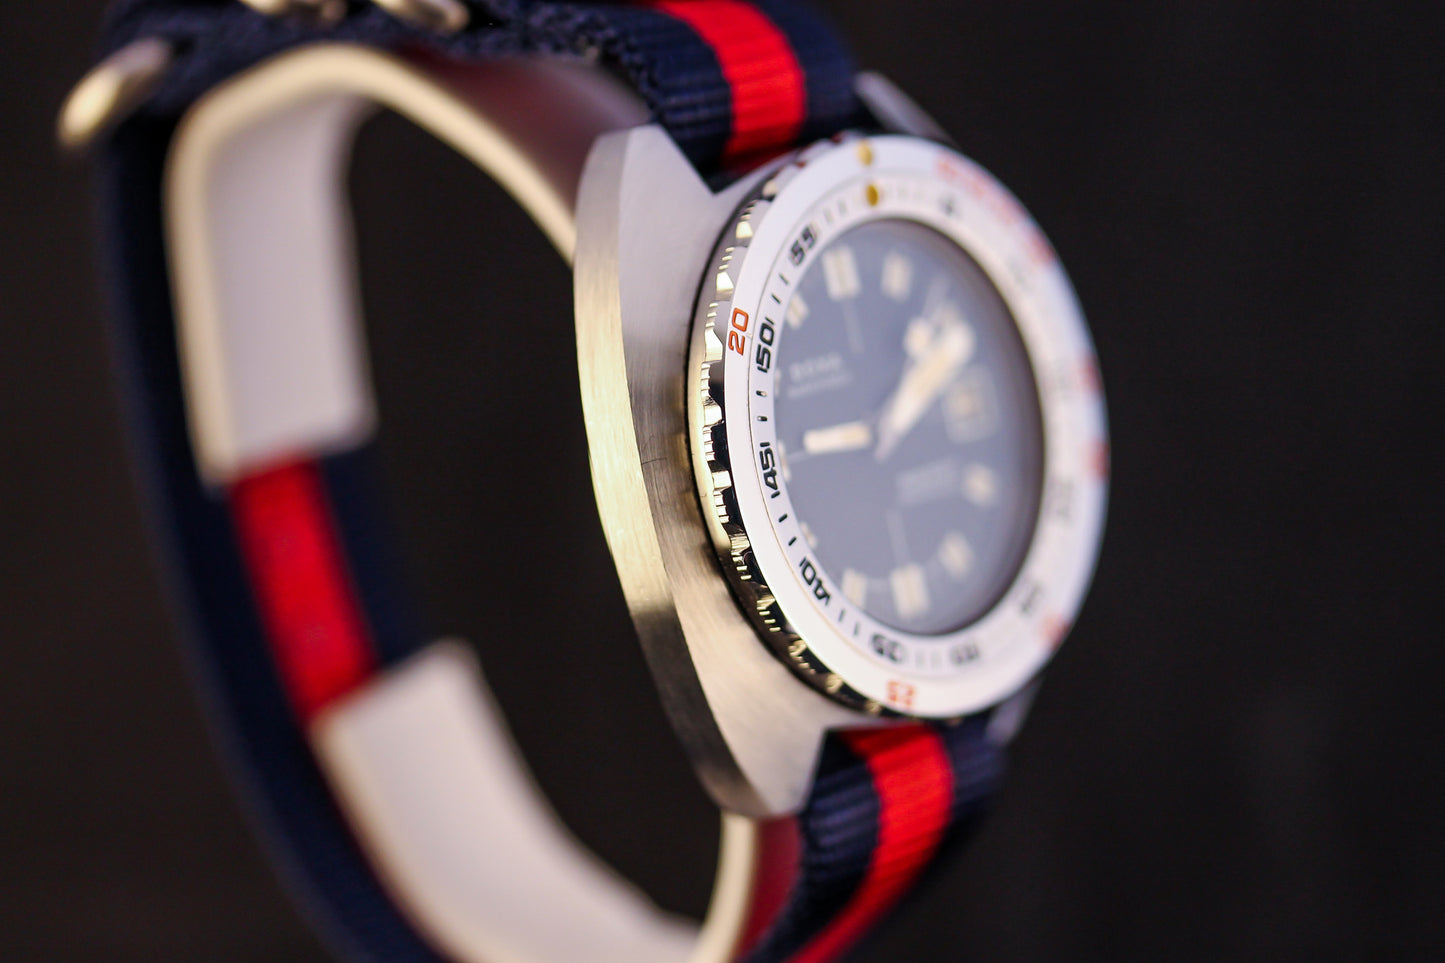 DOXA Sub 300T Sharkhunter Tropical Dial - Presented in Collaboration with Gear Patrol!